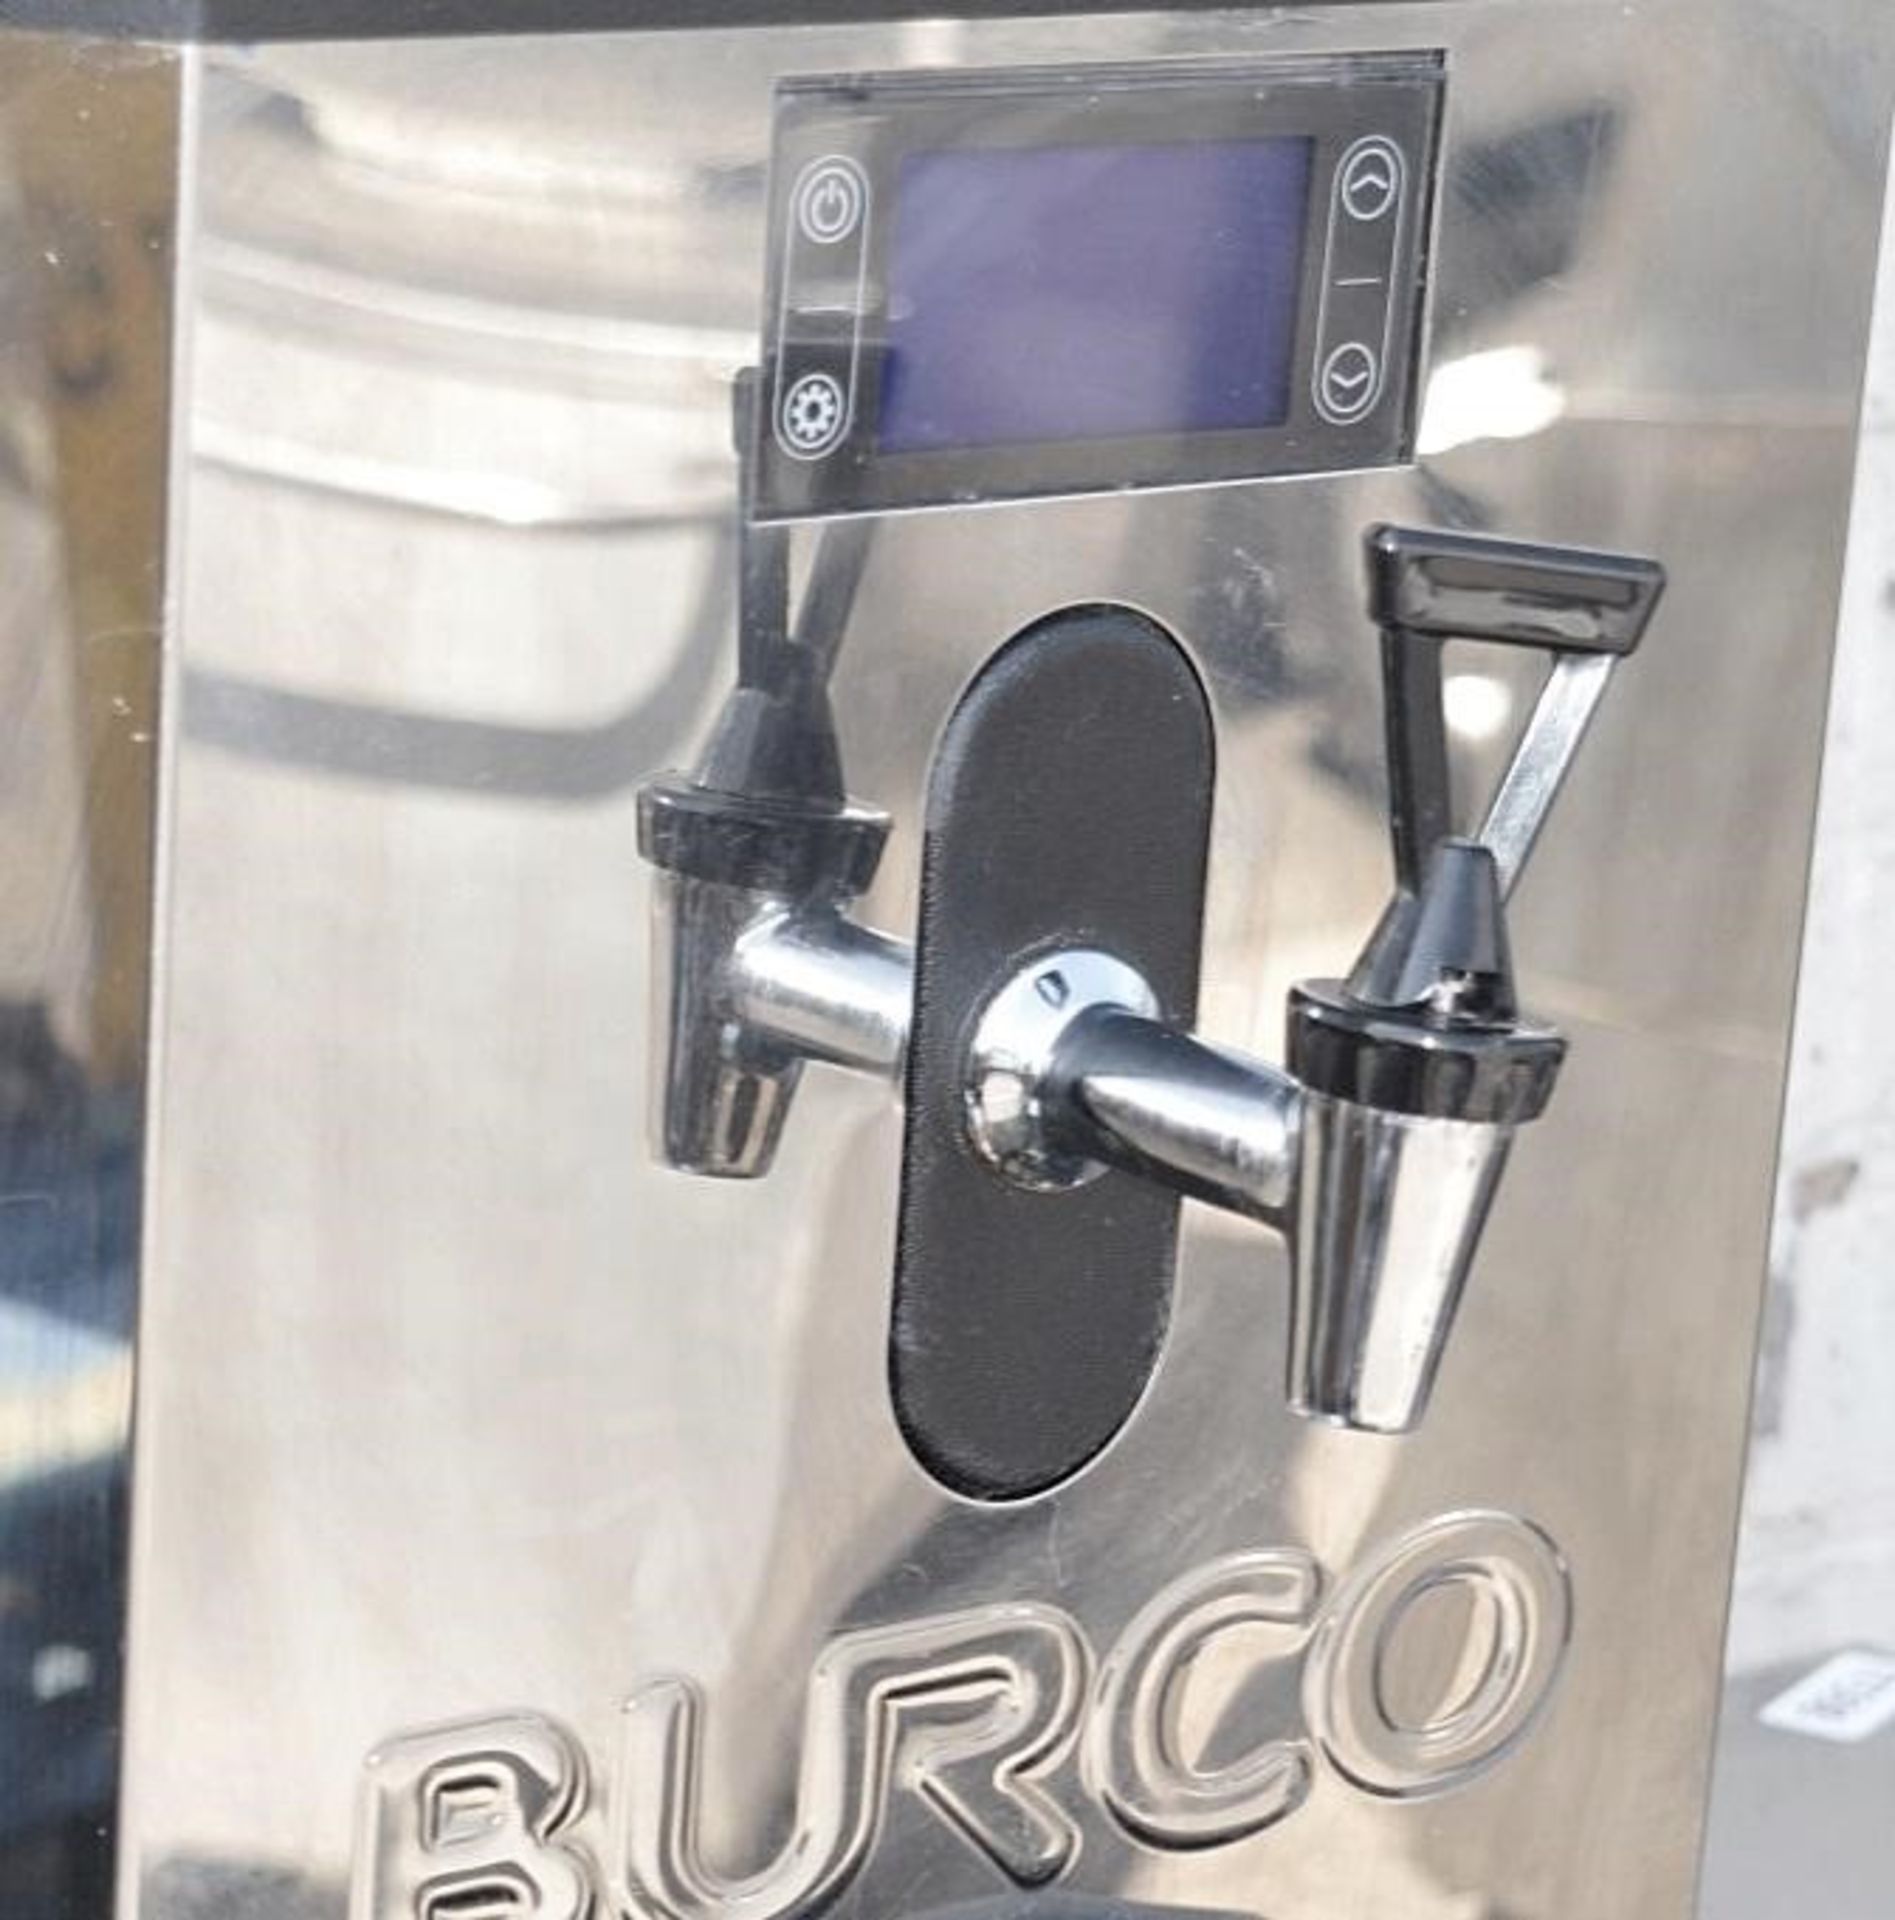 1 x BURCO Countertop Autofil Water Boiler With Filtration - 5 Litre Capacity - Stainless Steel Finis - Image 2 of 3